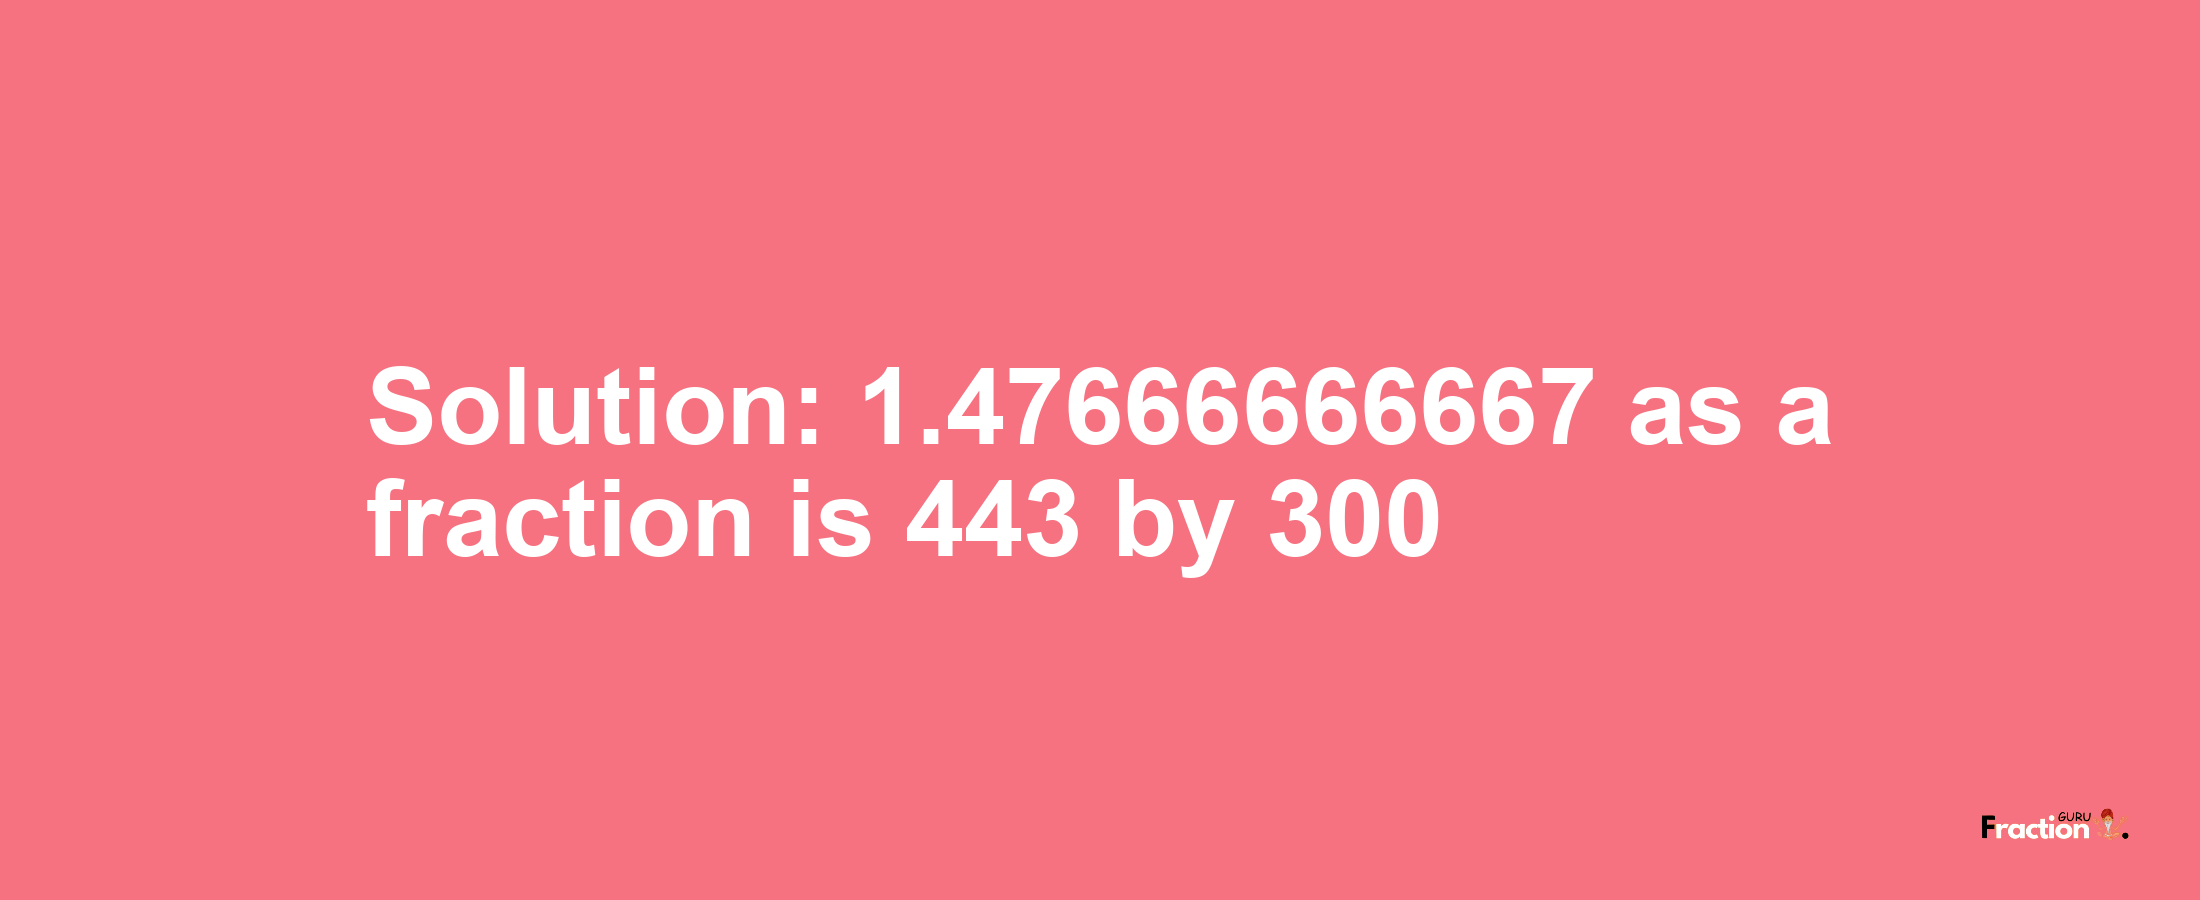 Solution:1.47666666667 as a fraction is 443/300